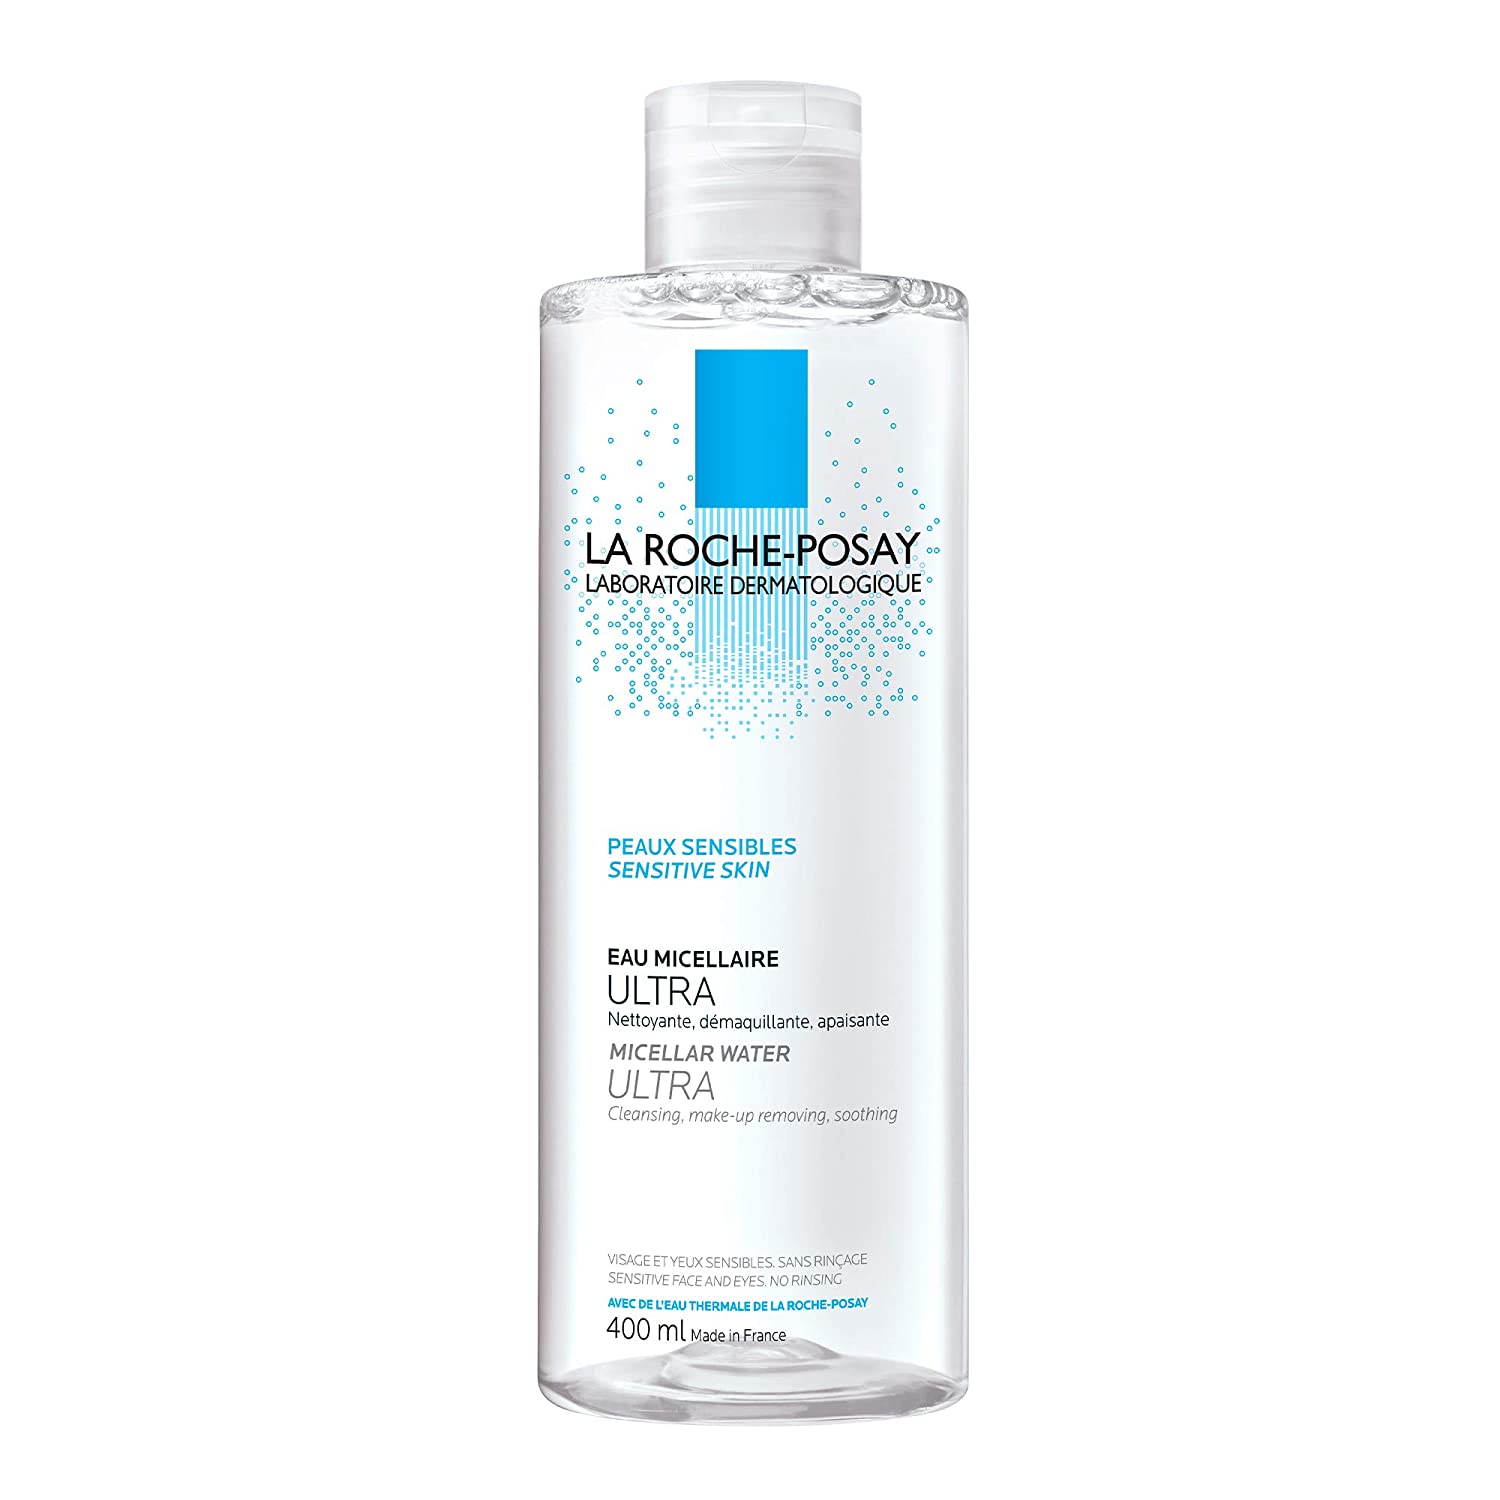 La Roche-Posay Oil & Alcohol Free Micellar Water Cleanser, 5.6-Ounce